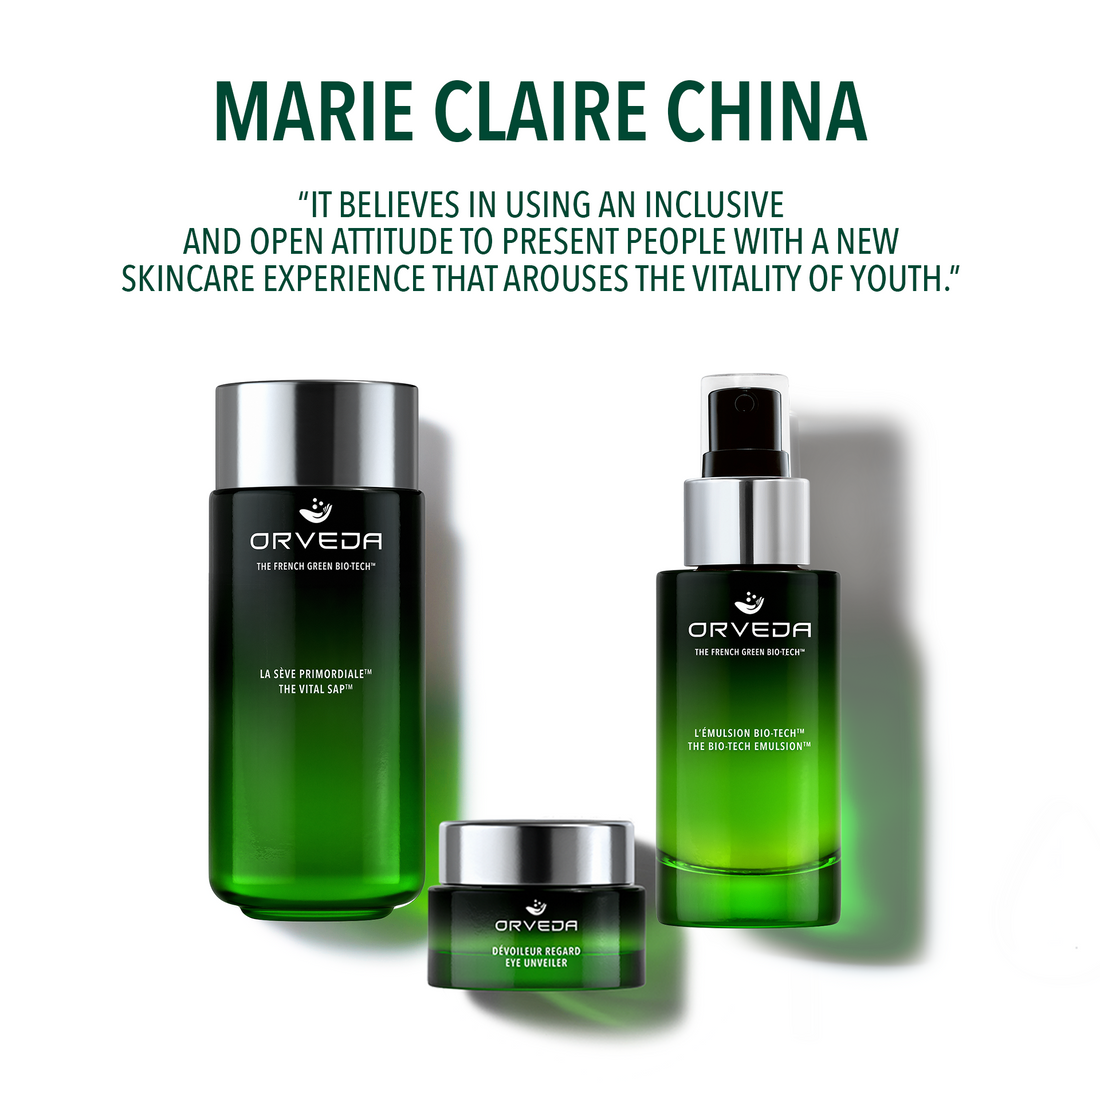 MARIE CLAIRE CHINA